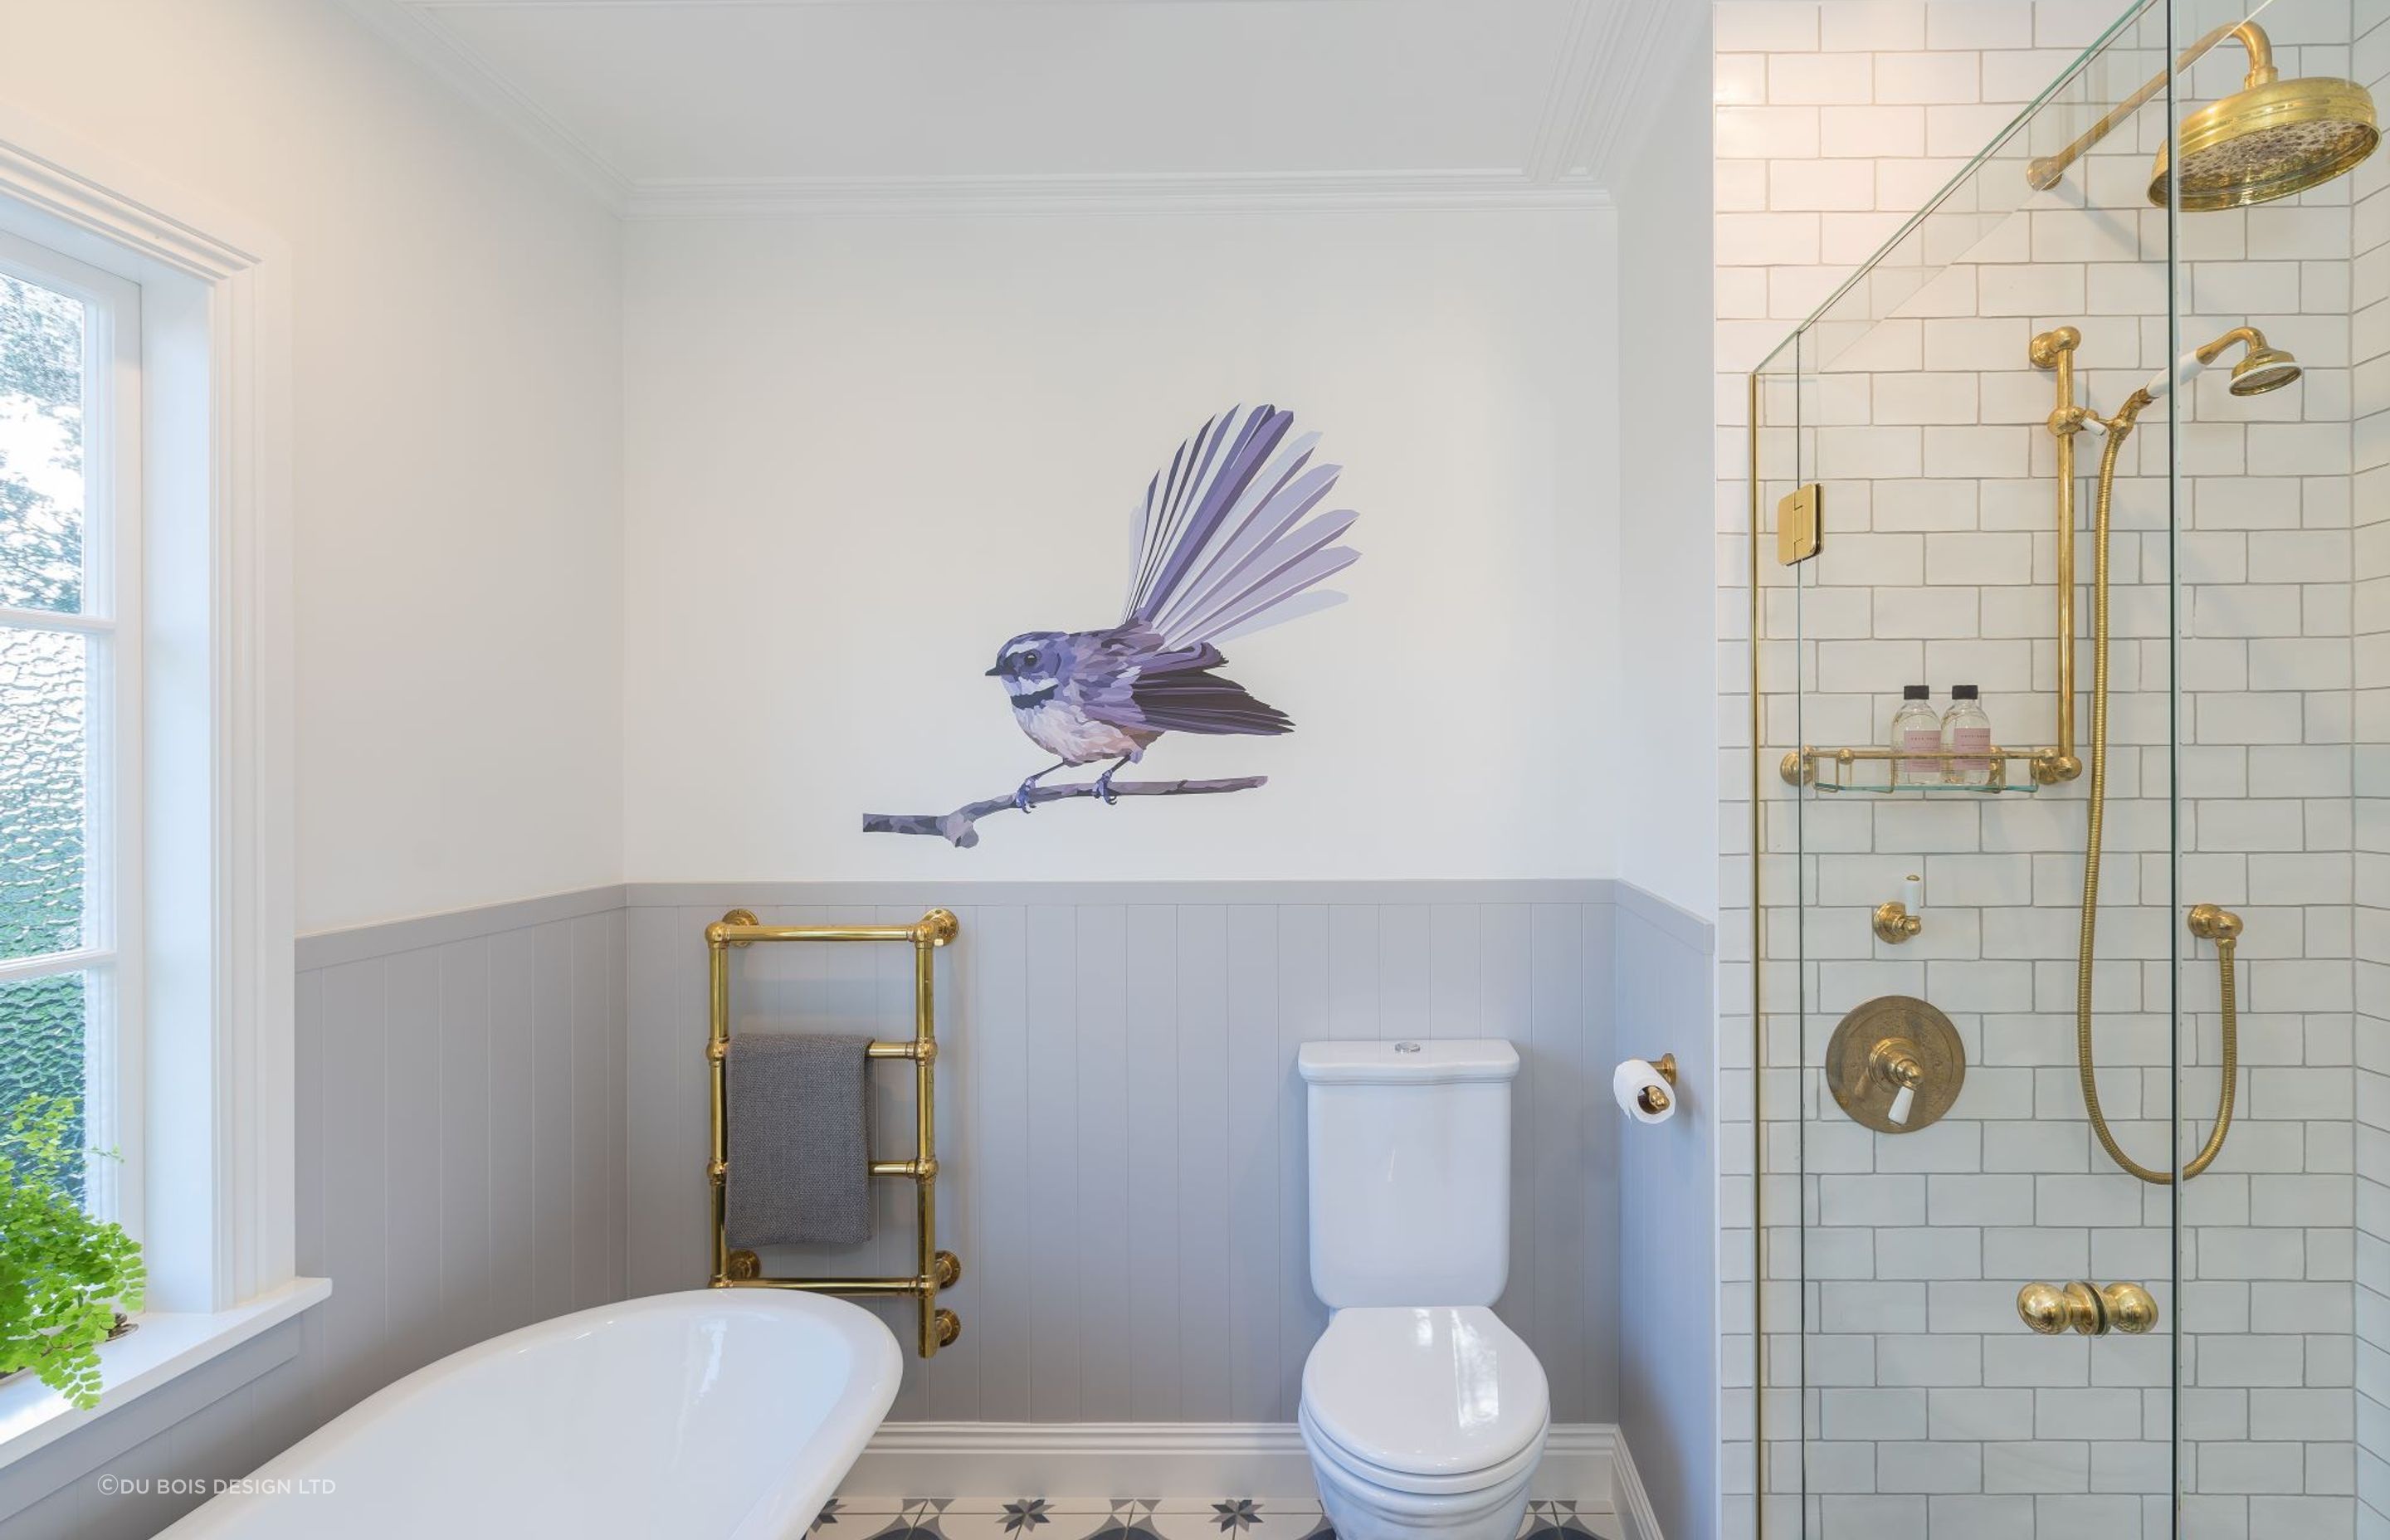 A pleasant wall decal, like the Piwakawaka in this bathroom renovation in Epsom, can make the space more comfortable for kids — Photography: Kallan Mac Leod